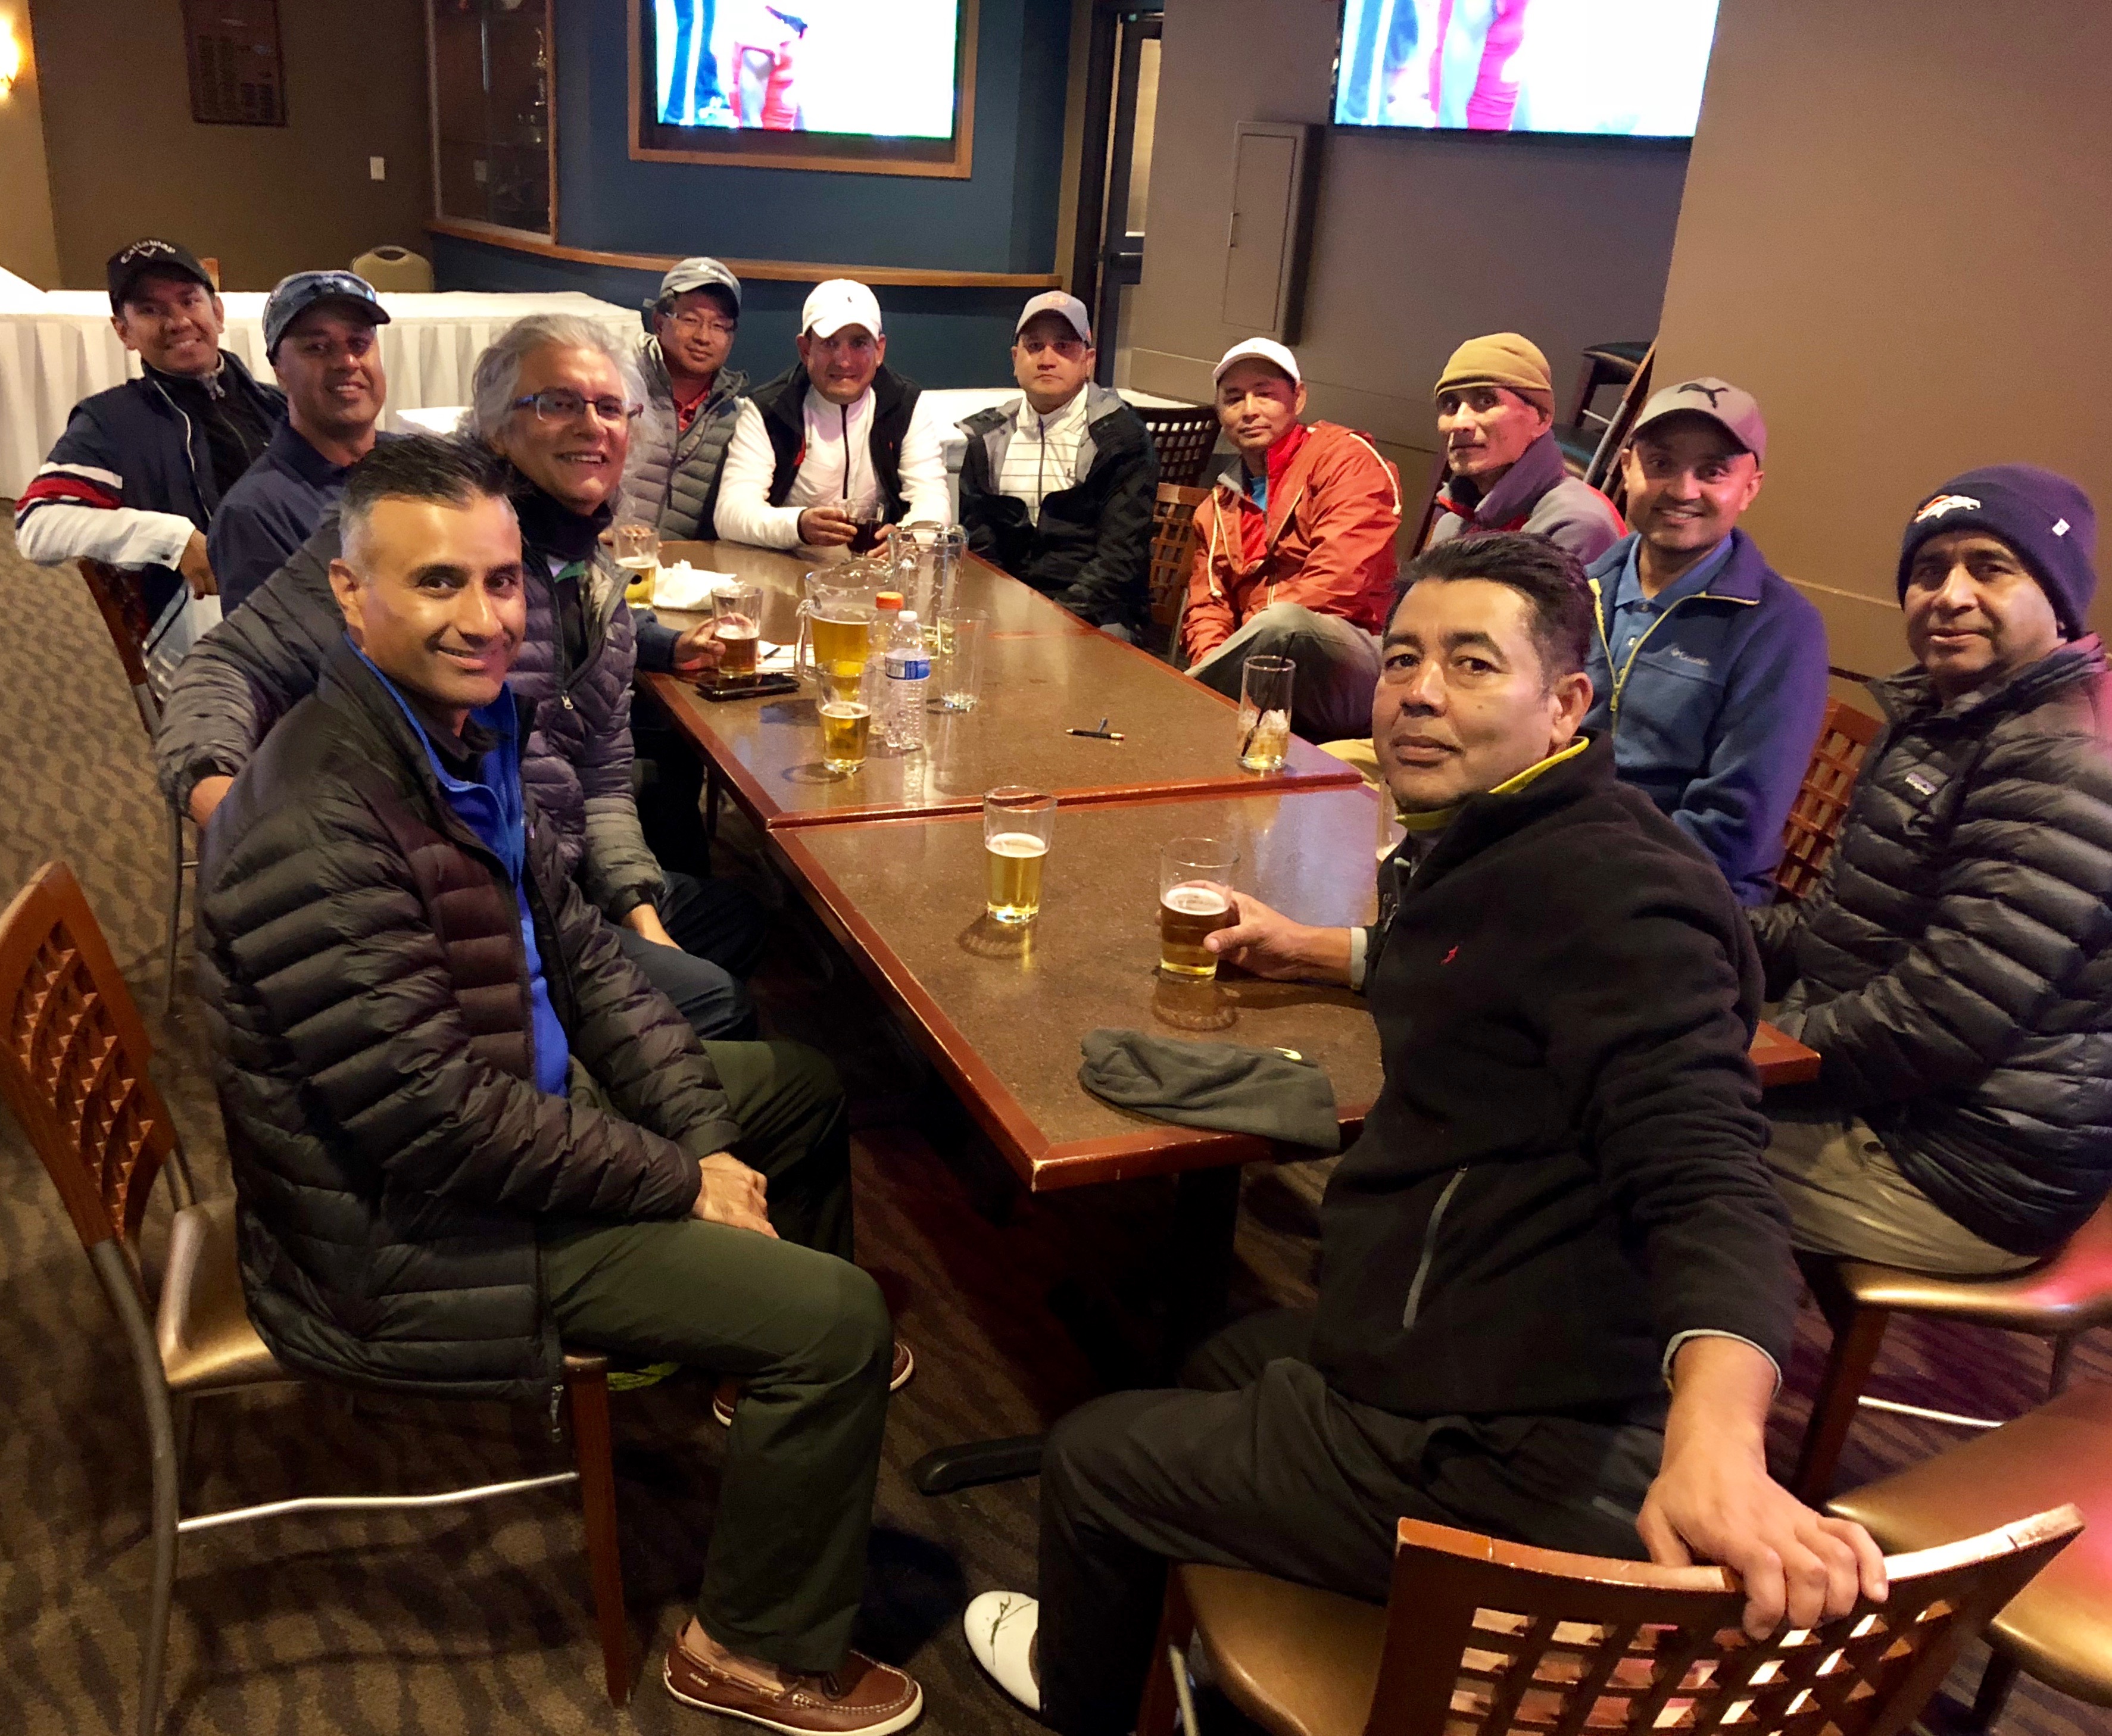 NNS Golf Tournament completed on September 29th, 2018